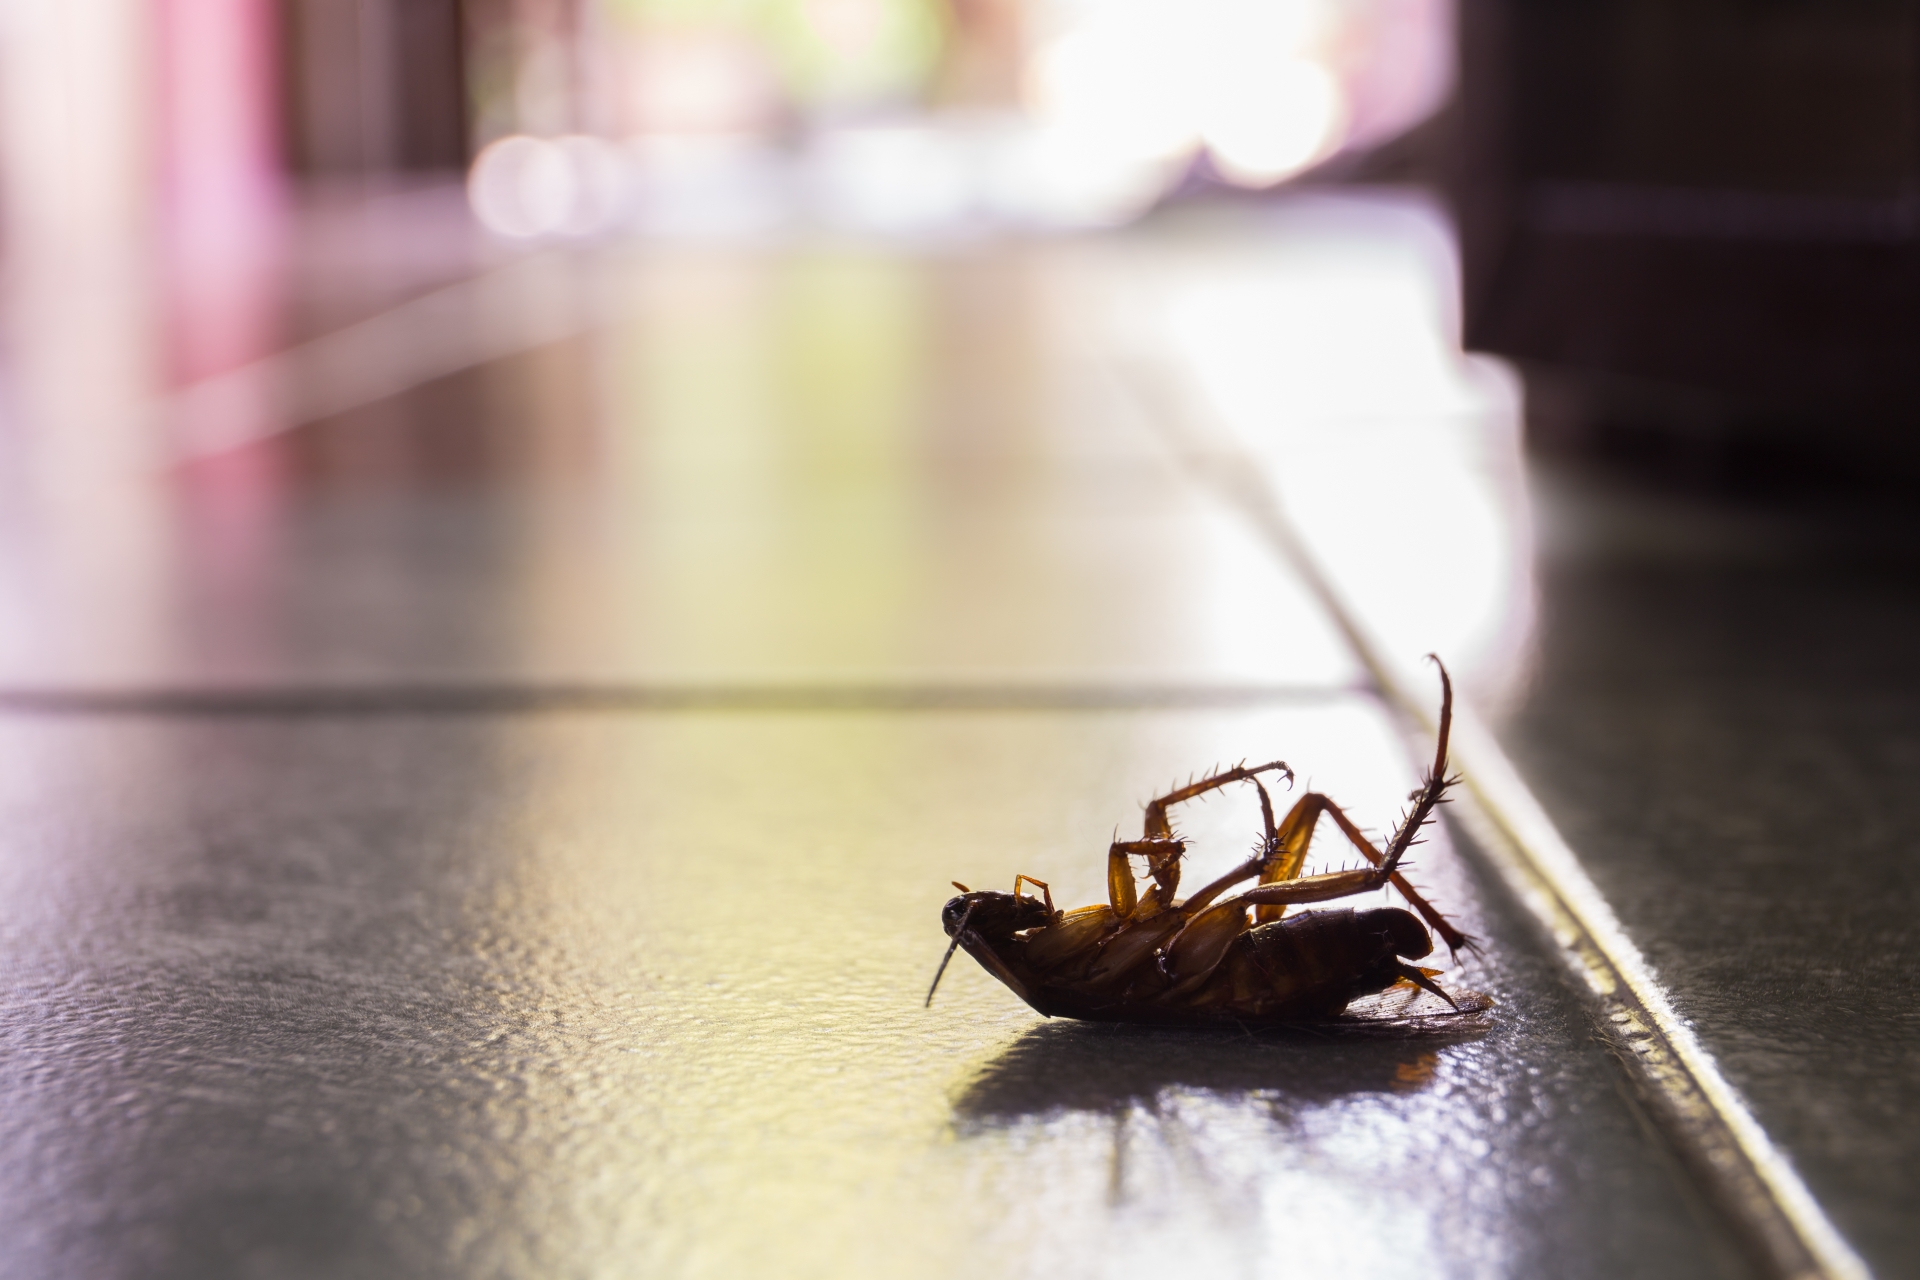 Cockroach Control, Pest Control in Archway, N19. Call Now 020 8166 9746